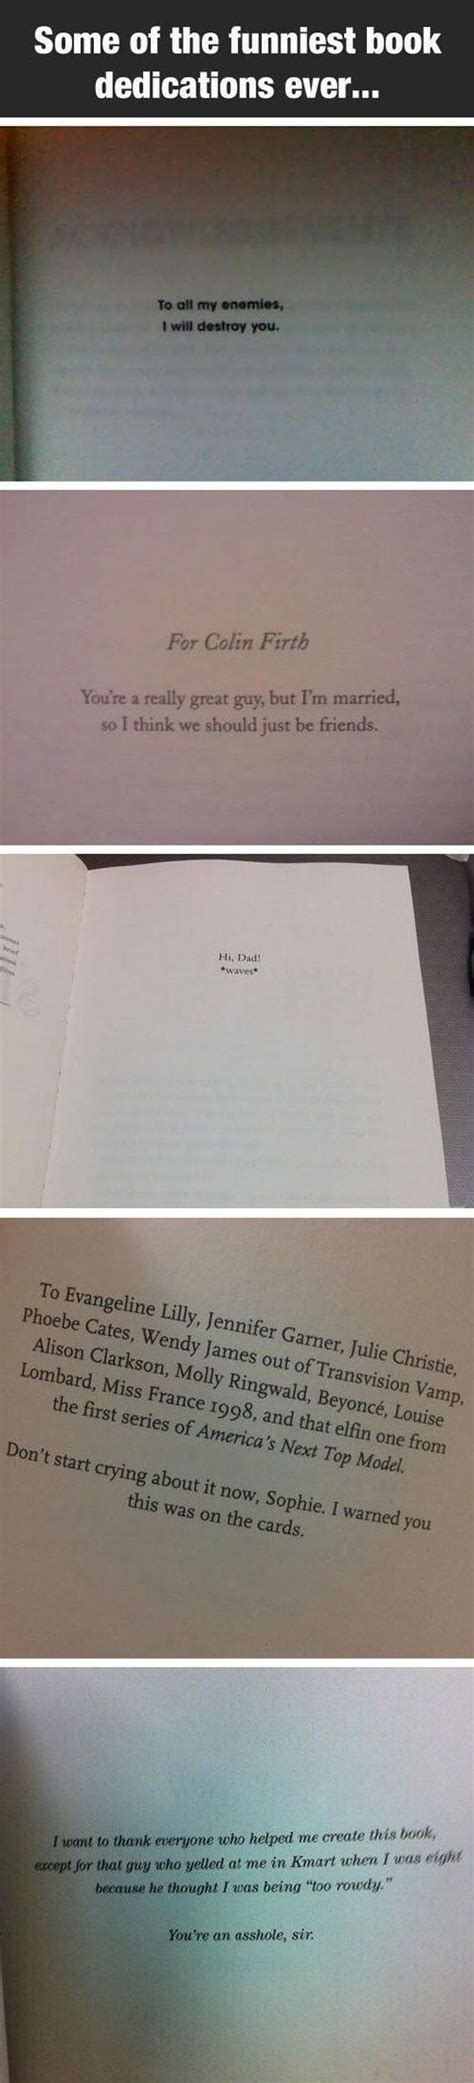 internets  asked questions funny book dedications book